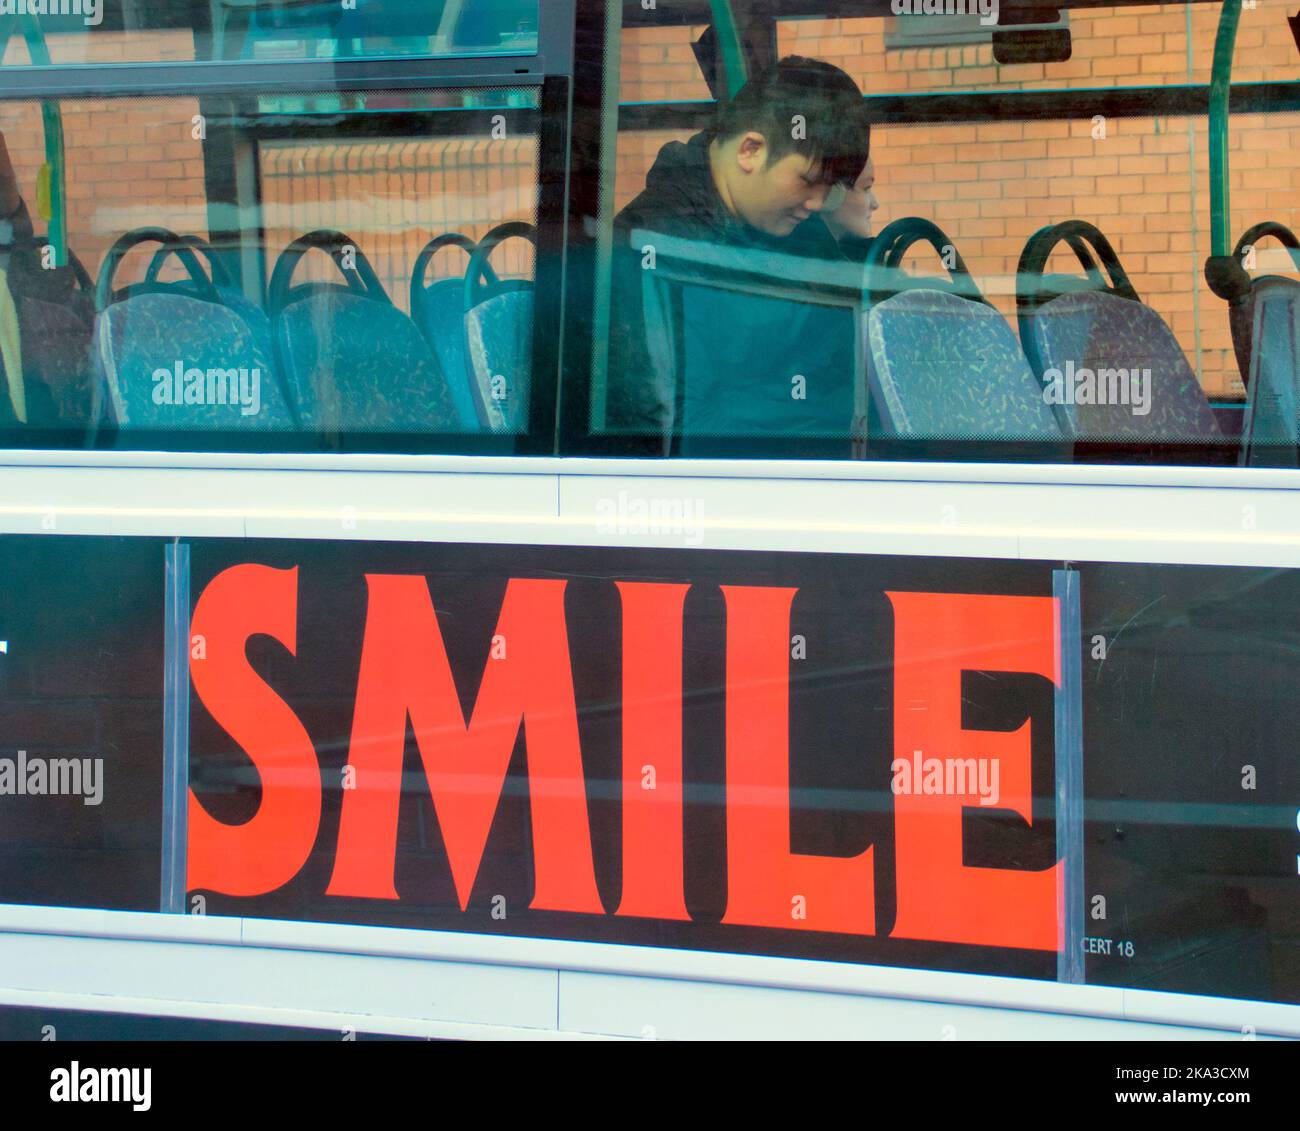 Smile advert on bus with passenger Stock Photo